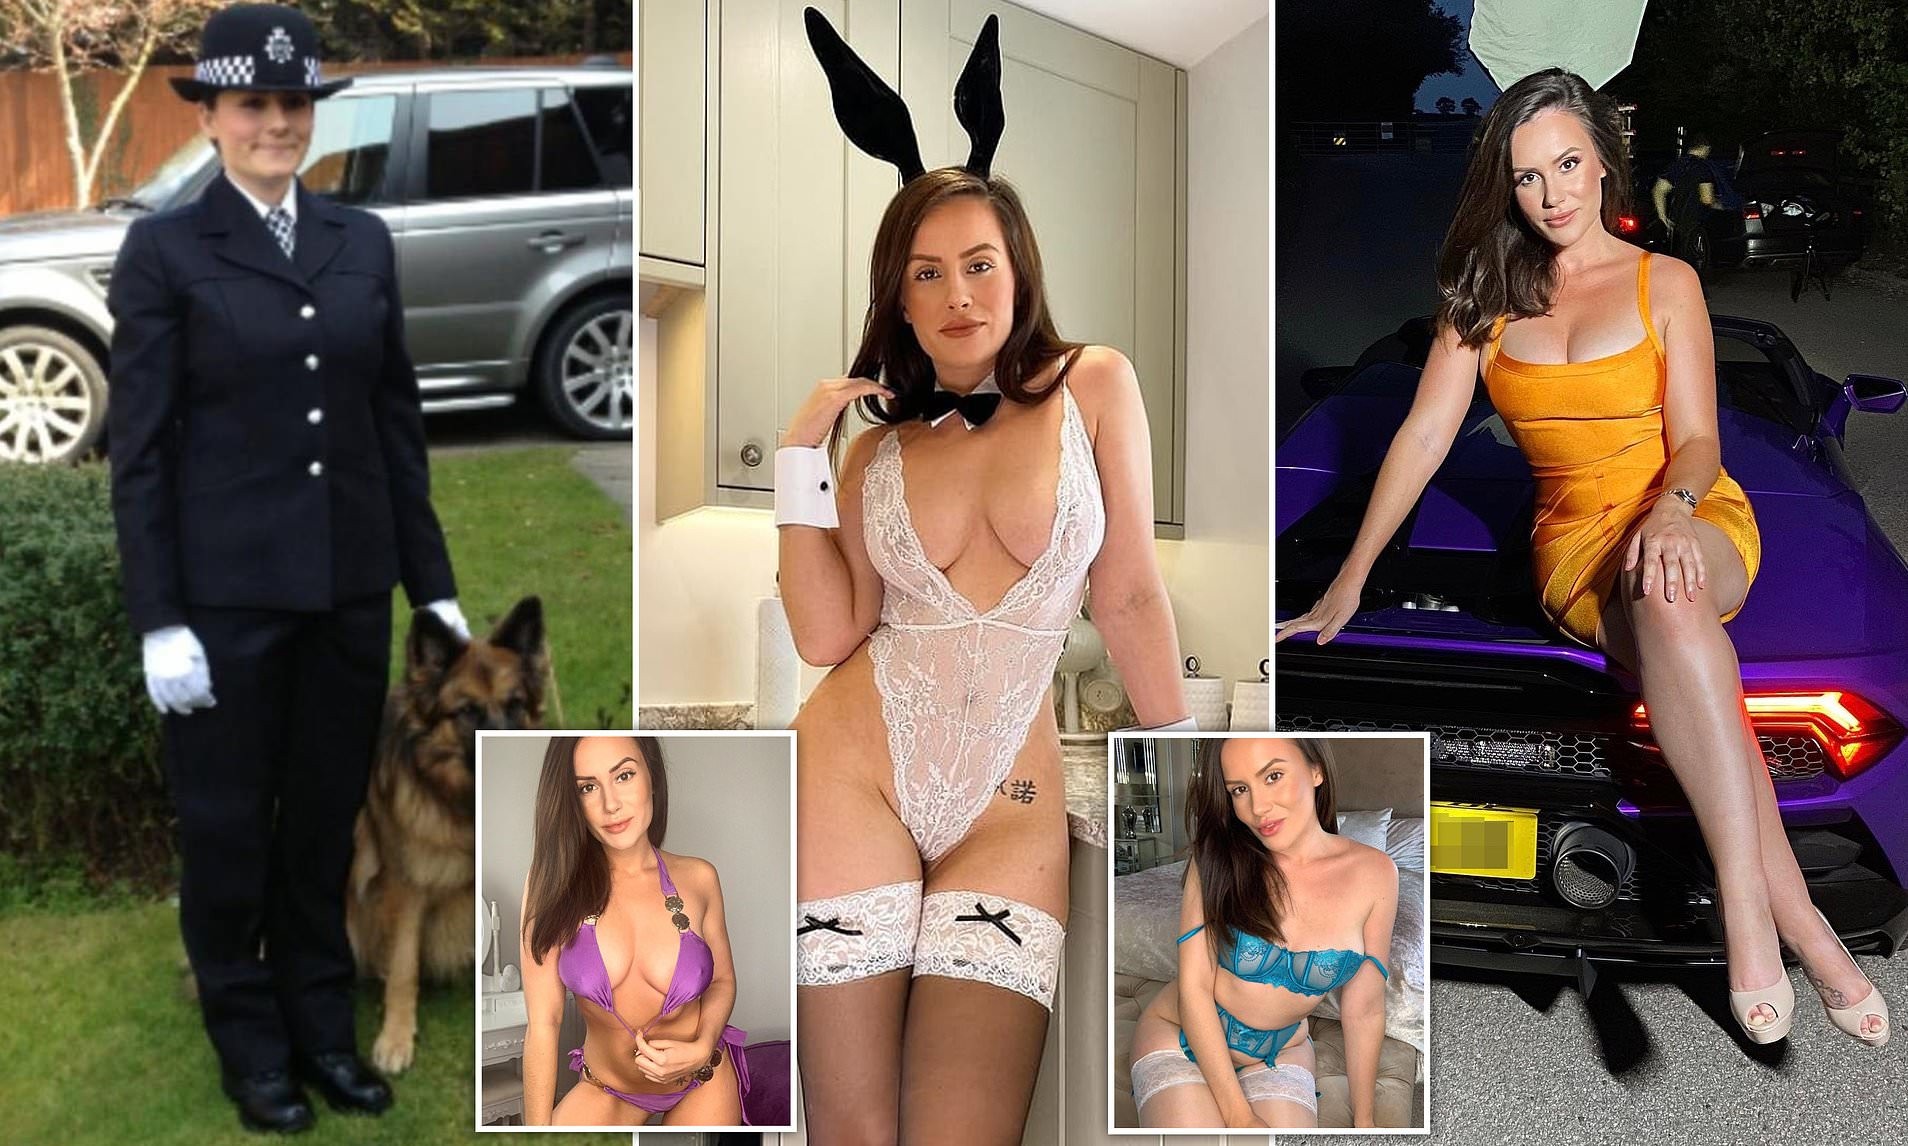 Police Officer Ditched Her Job & Became An Adult Star